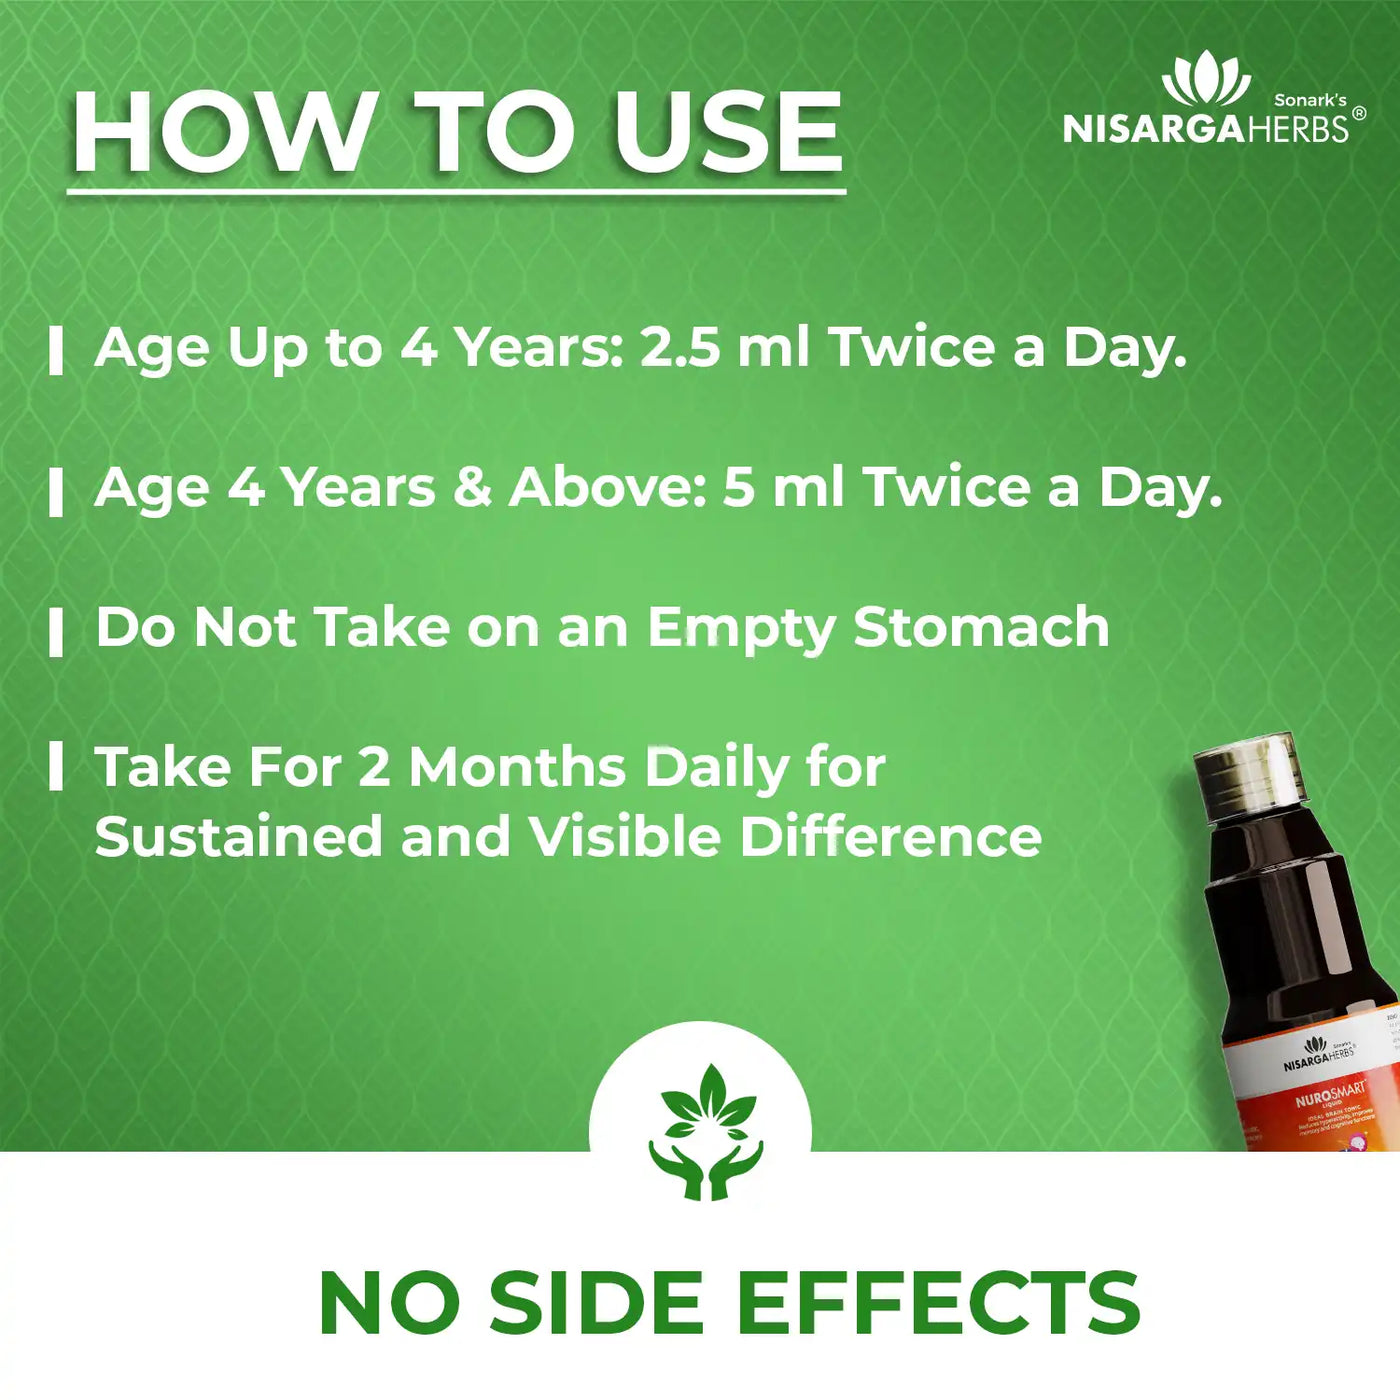 Daily use instructions for nurosmart syrup for great results 